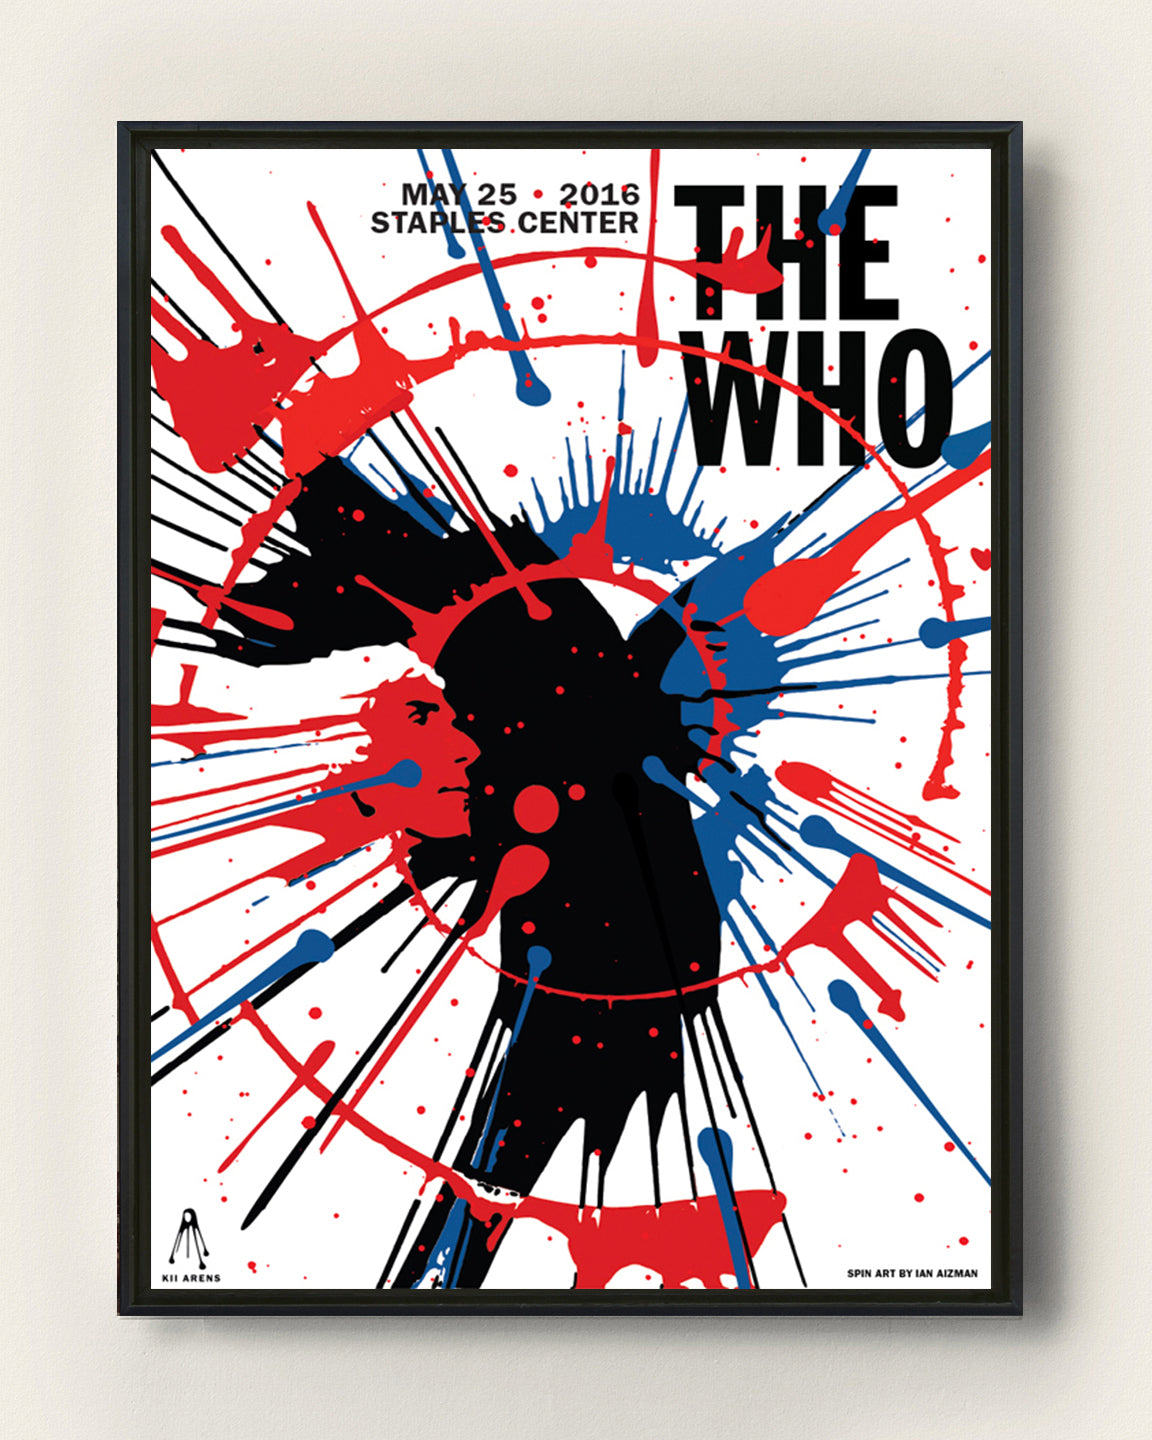 THE WHO - LOS ANGELES, CA 2016